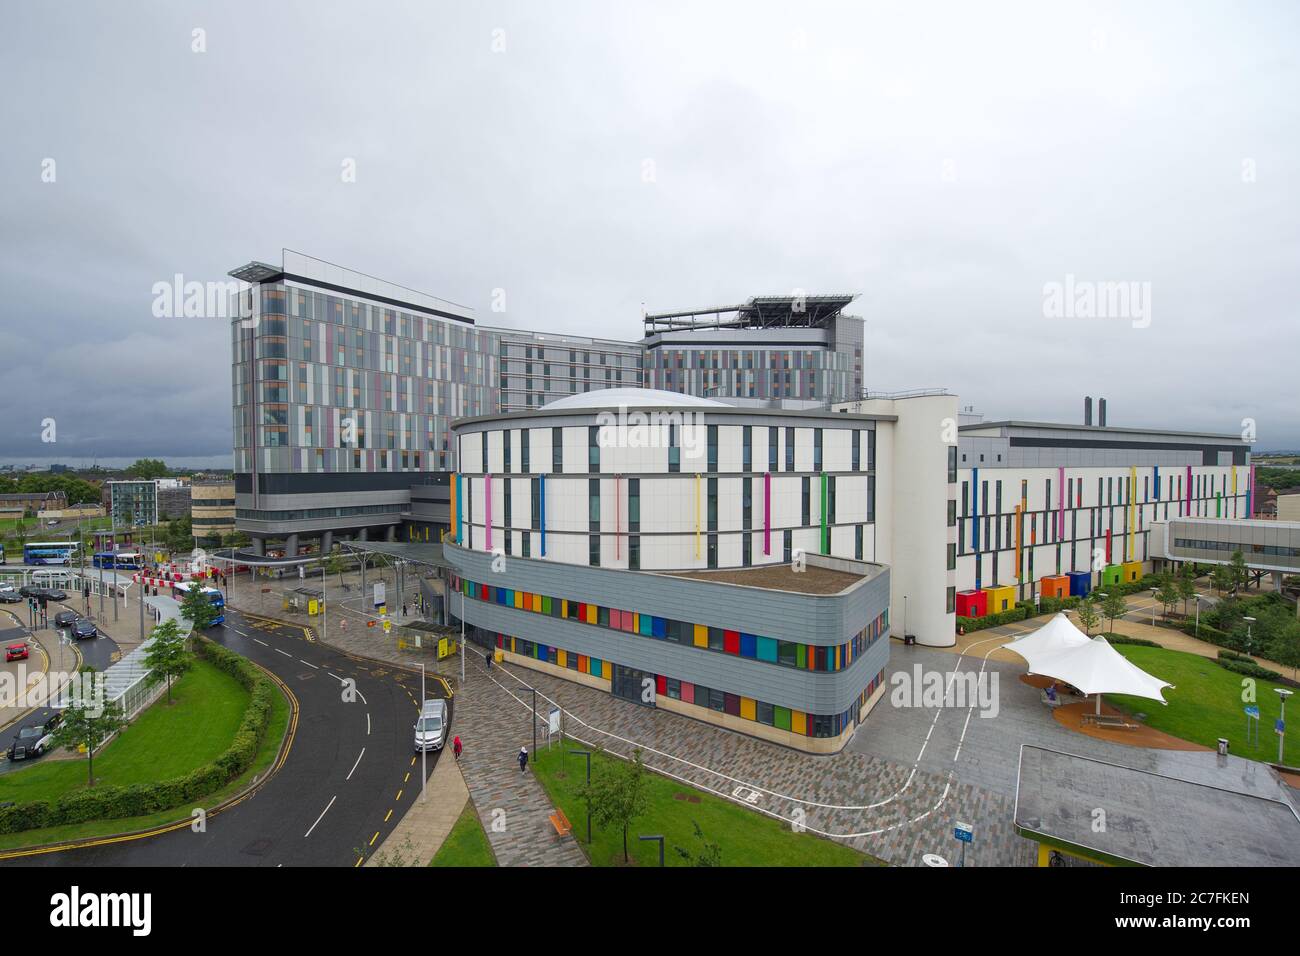 Glasgow, Scotland, UK. 17 July 2020 Pictured: Queen Elizabeth University Hospital (QEUH) run by NHS Greater Glasgow and Clyde Health Board. Last month a government-commissioned independent review found that vulnerable patients were placed at increased risk because of substandard water and ventilation systems at the hospital. But the review said there was no 'sound' evidence that patients died as a result. Credit: Colin Fisher/Alamy Live News Stock Photo